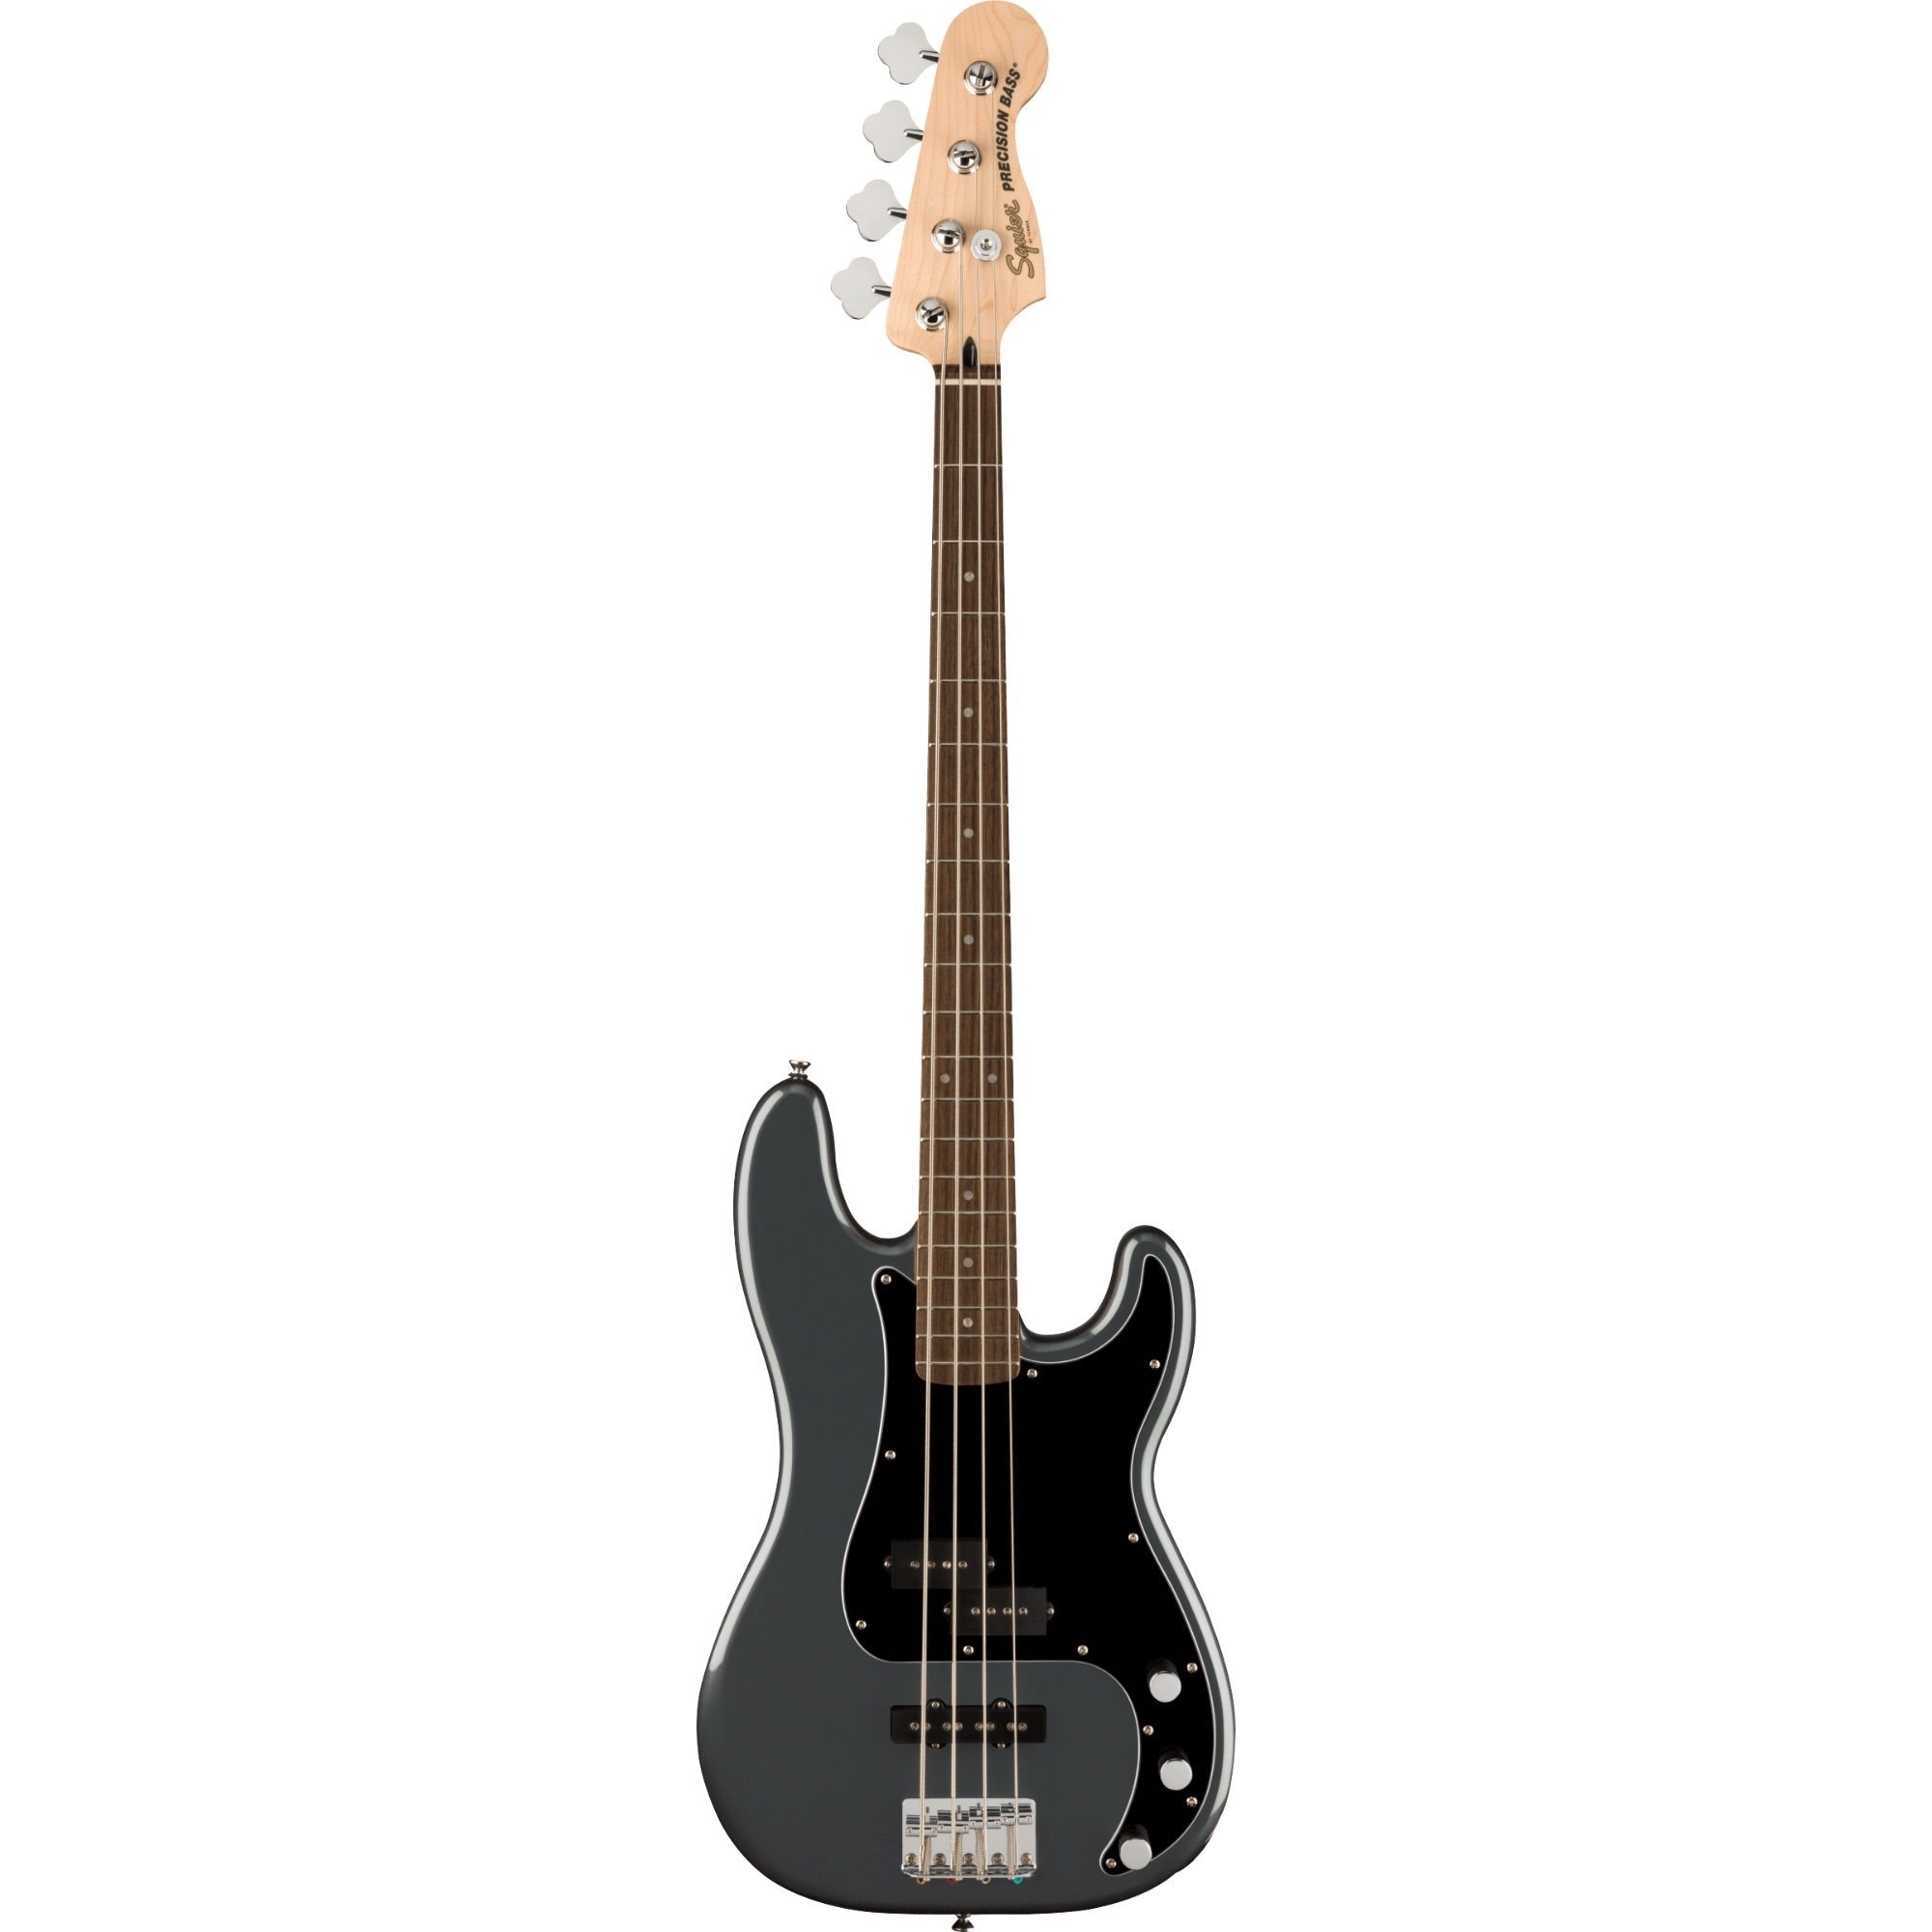 Squier Affinity Precision Bass, Charcoal Frost Metallic